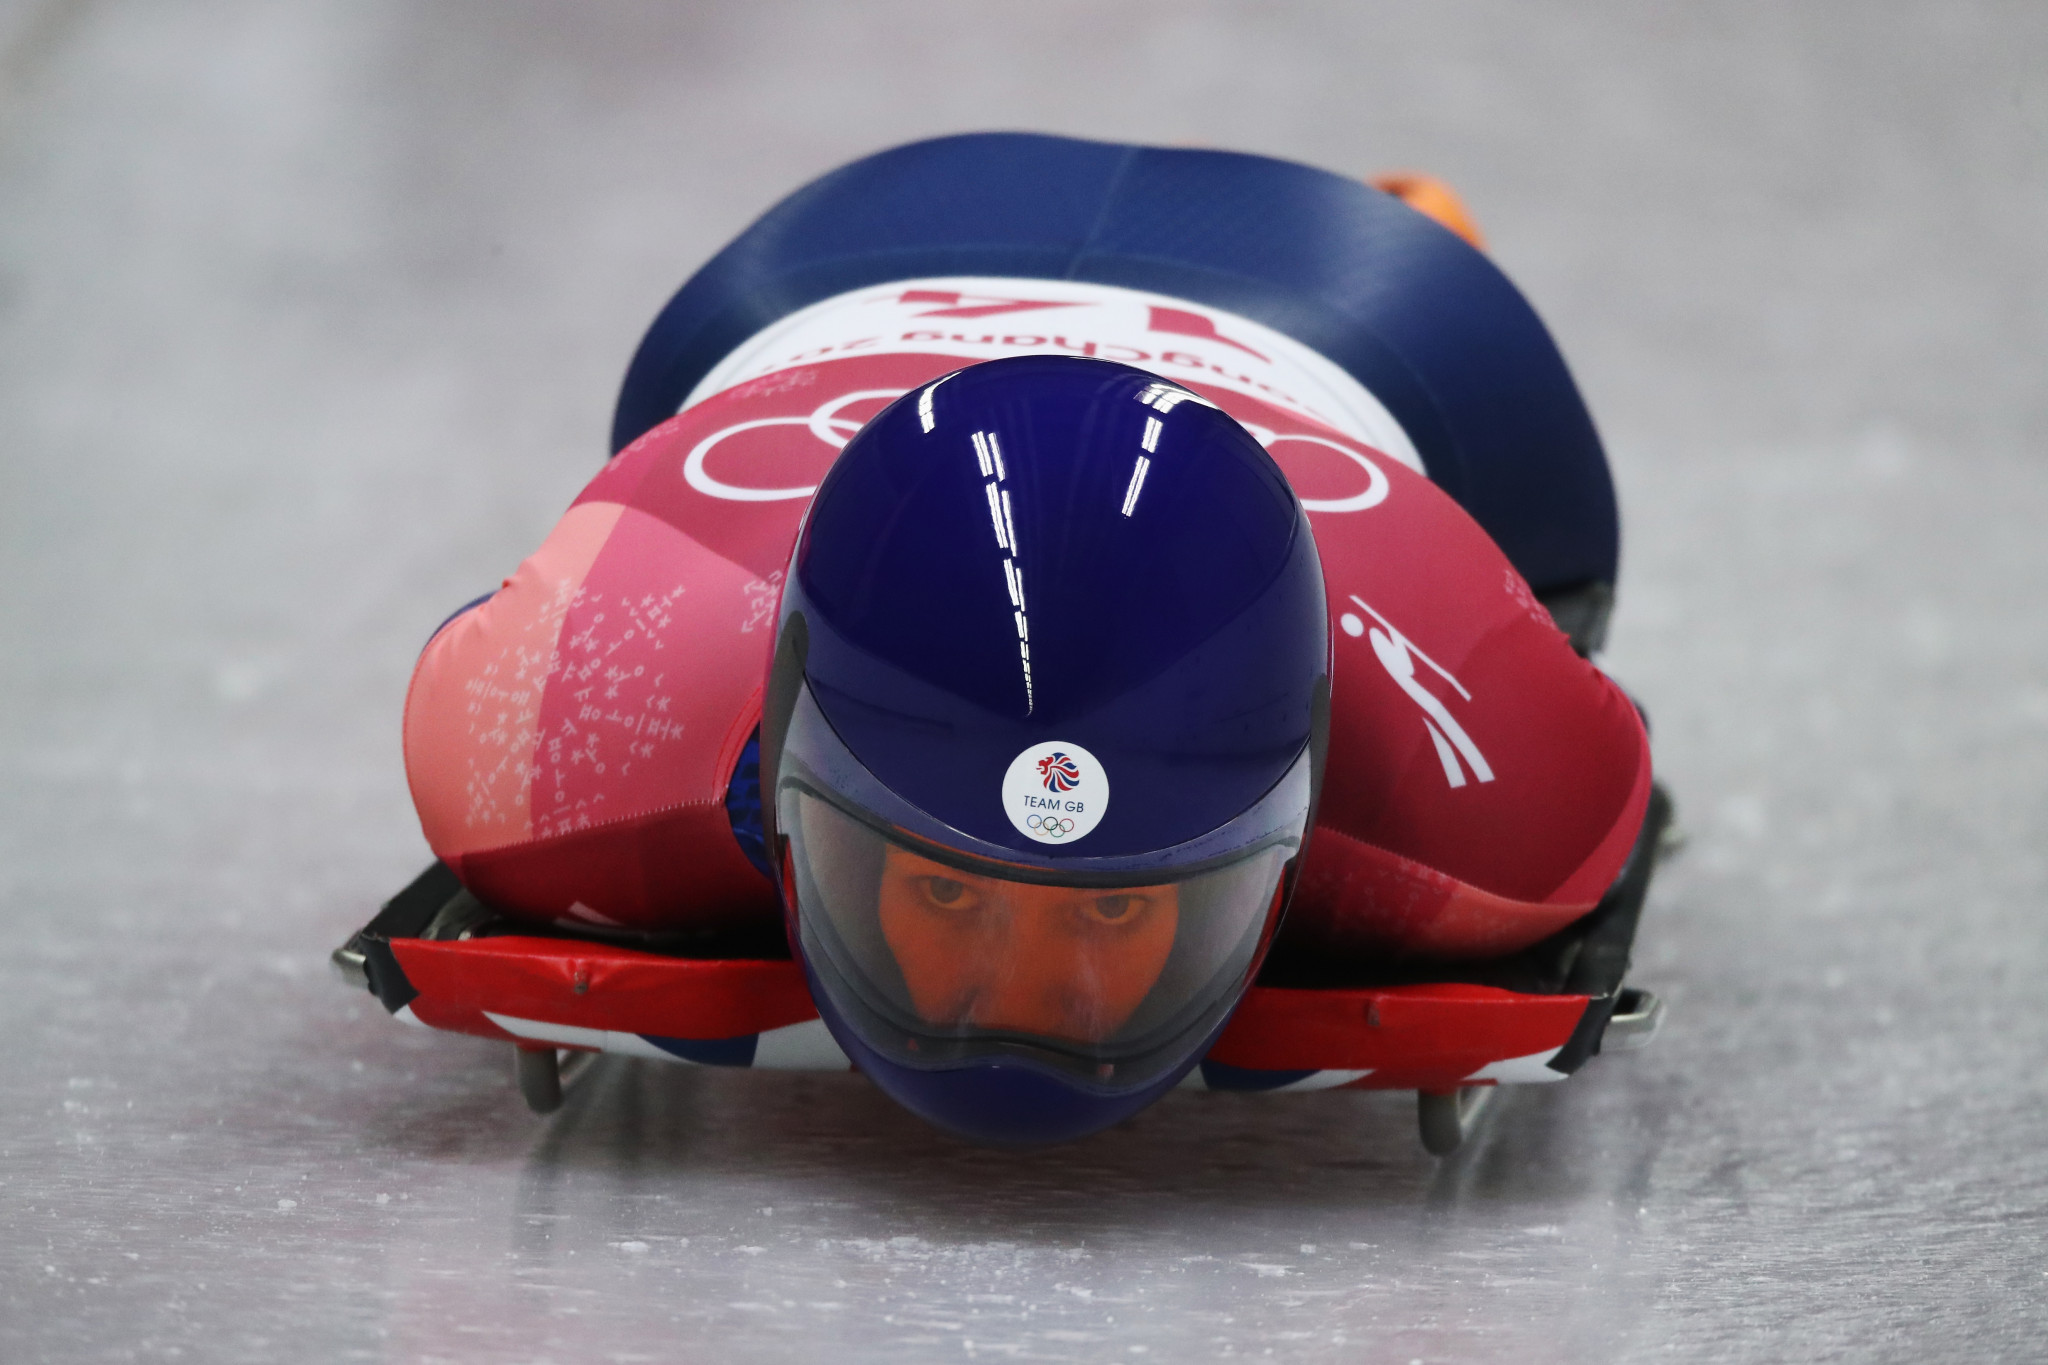 Lizzy Yarnold's victory at the skeleton at Pyeongchang 2018 means Britain's women have won the last three consecutive Olympic gold medals in the event ©Getty Images